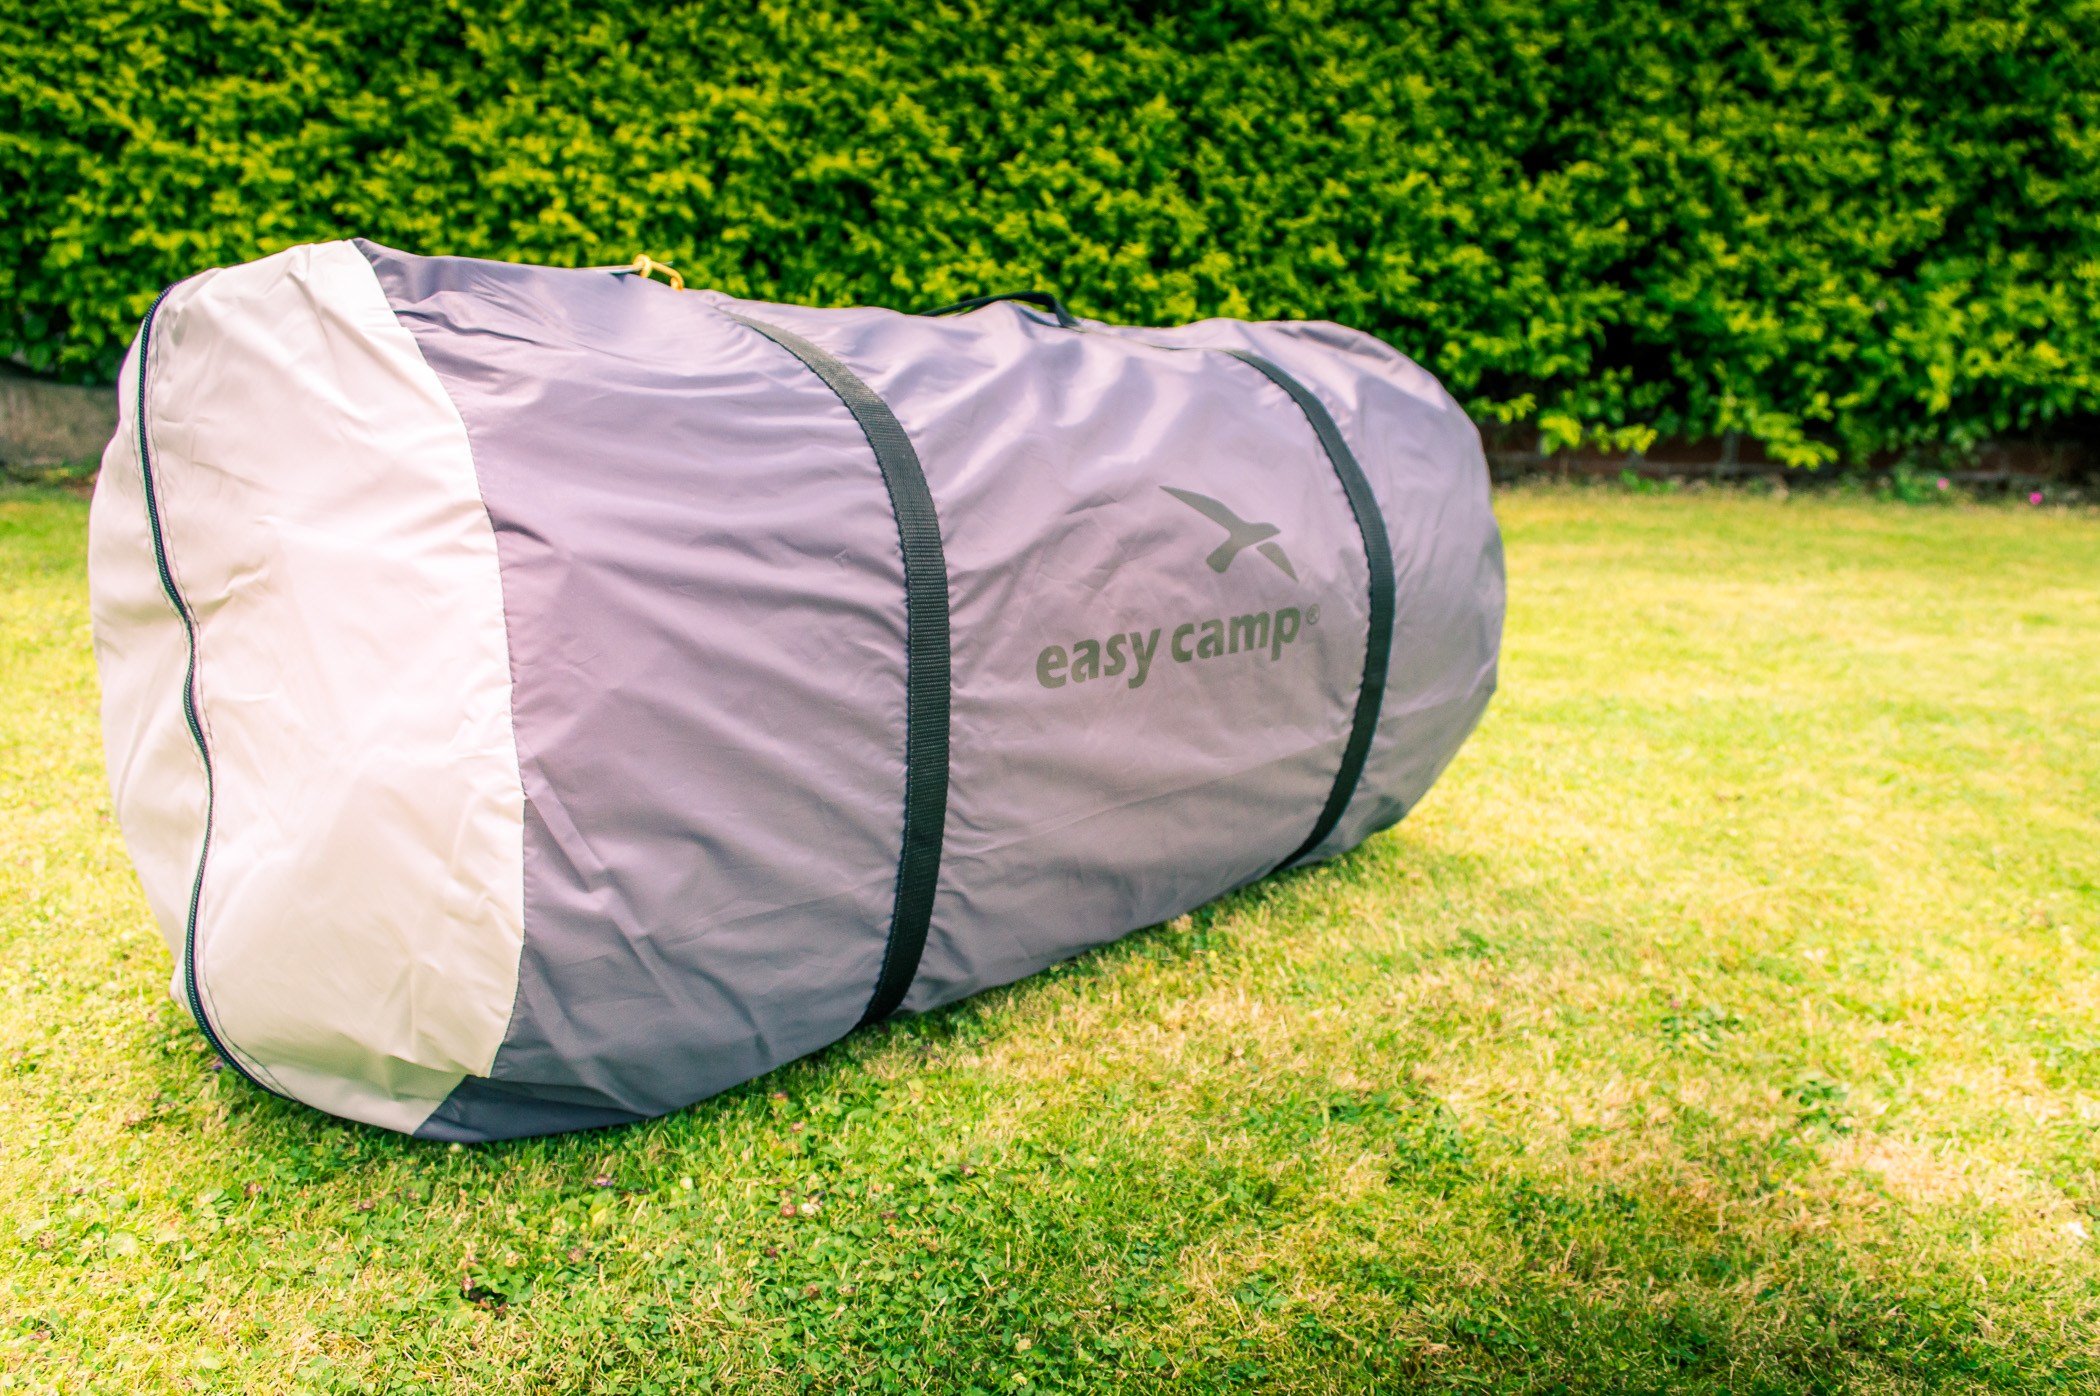 The Easy Camp Tempest 500 in its bag